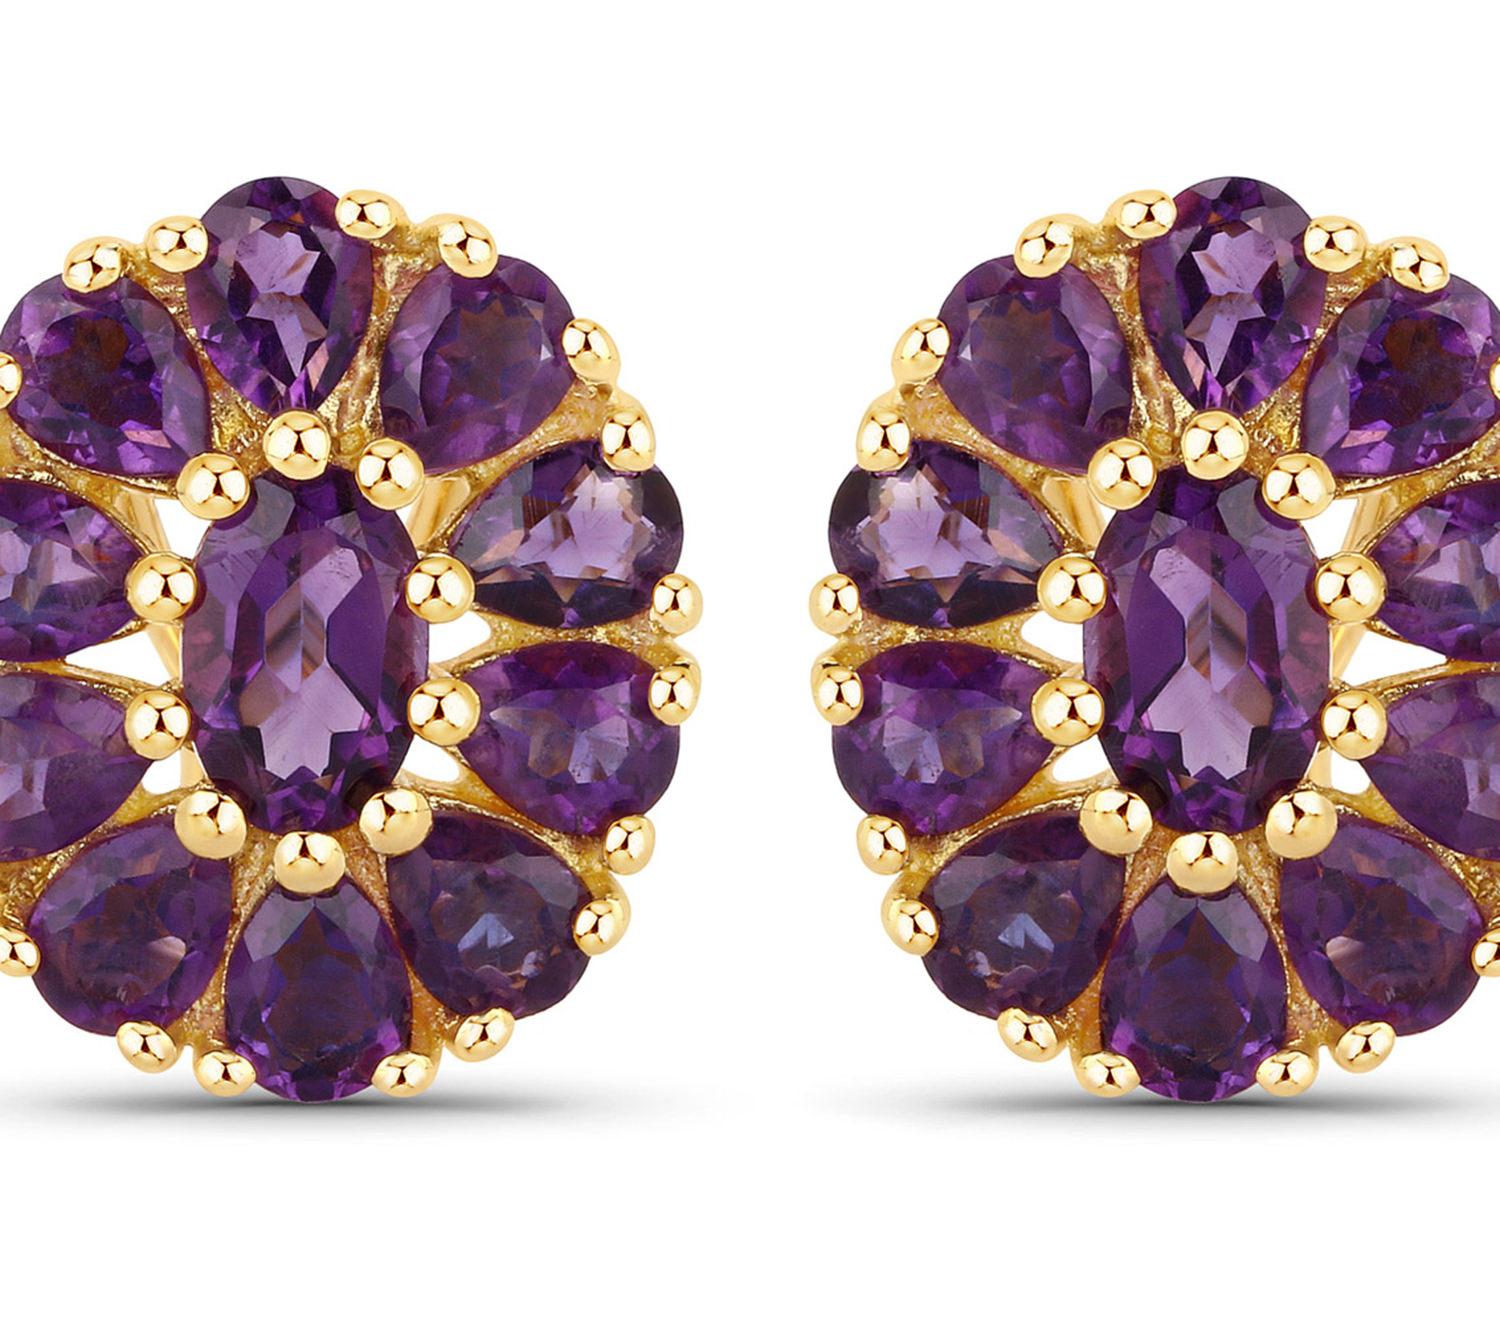 Contemporary Natural Amethyst Floral Statement Earrings 3.8 Carats Total For Sale